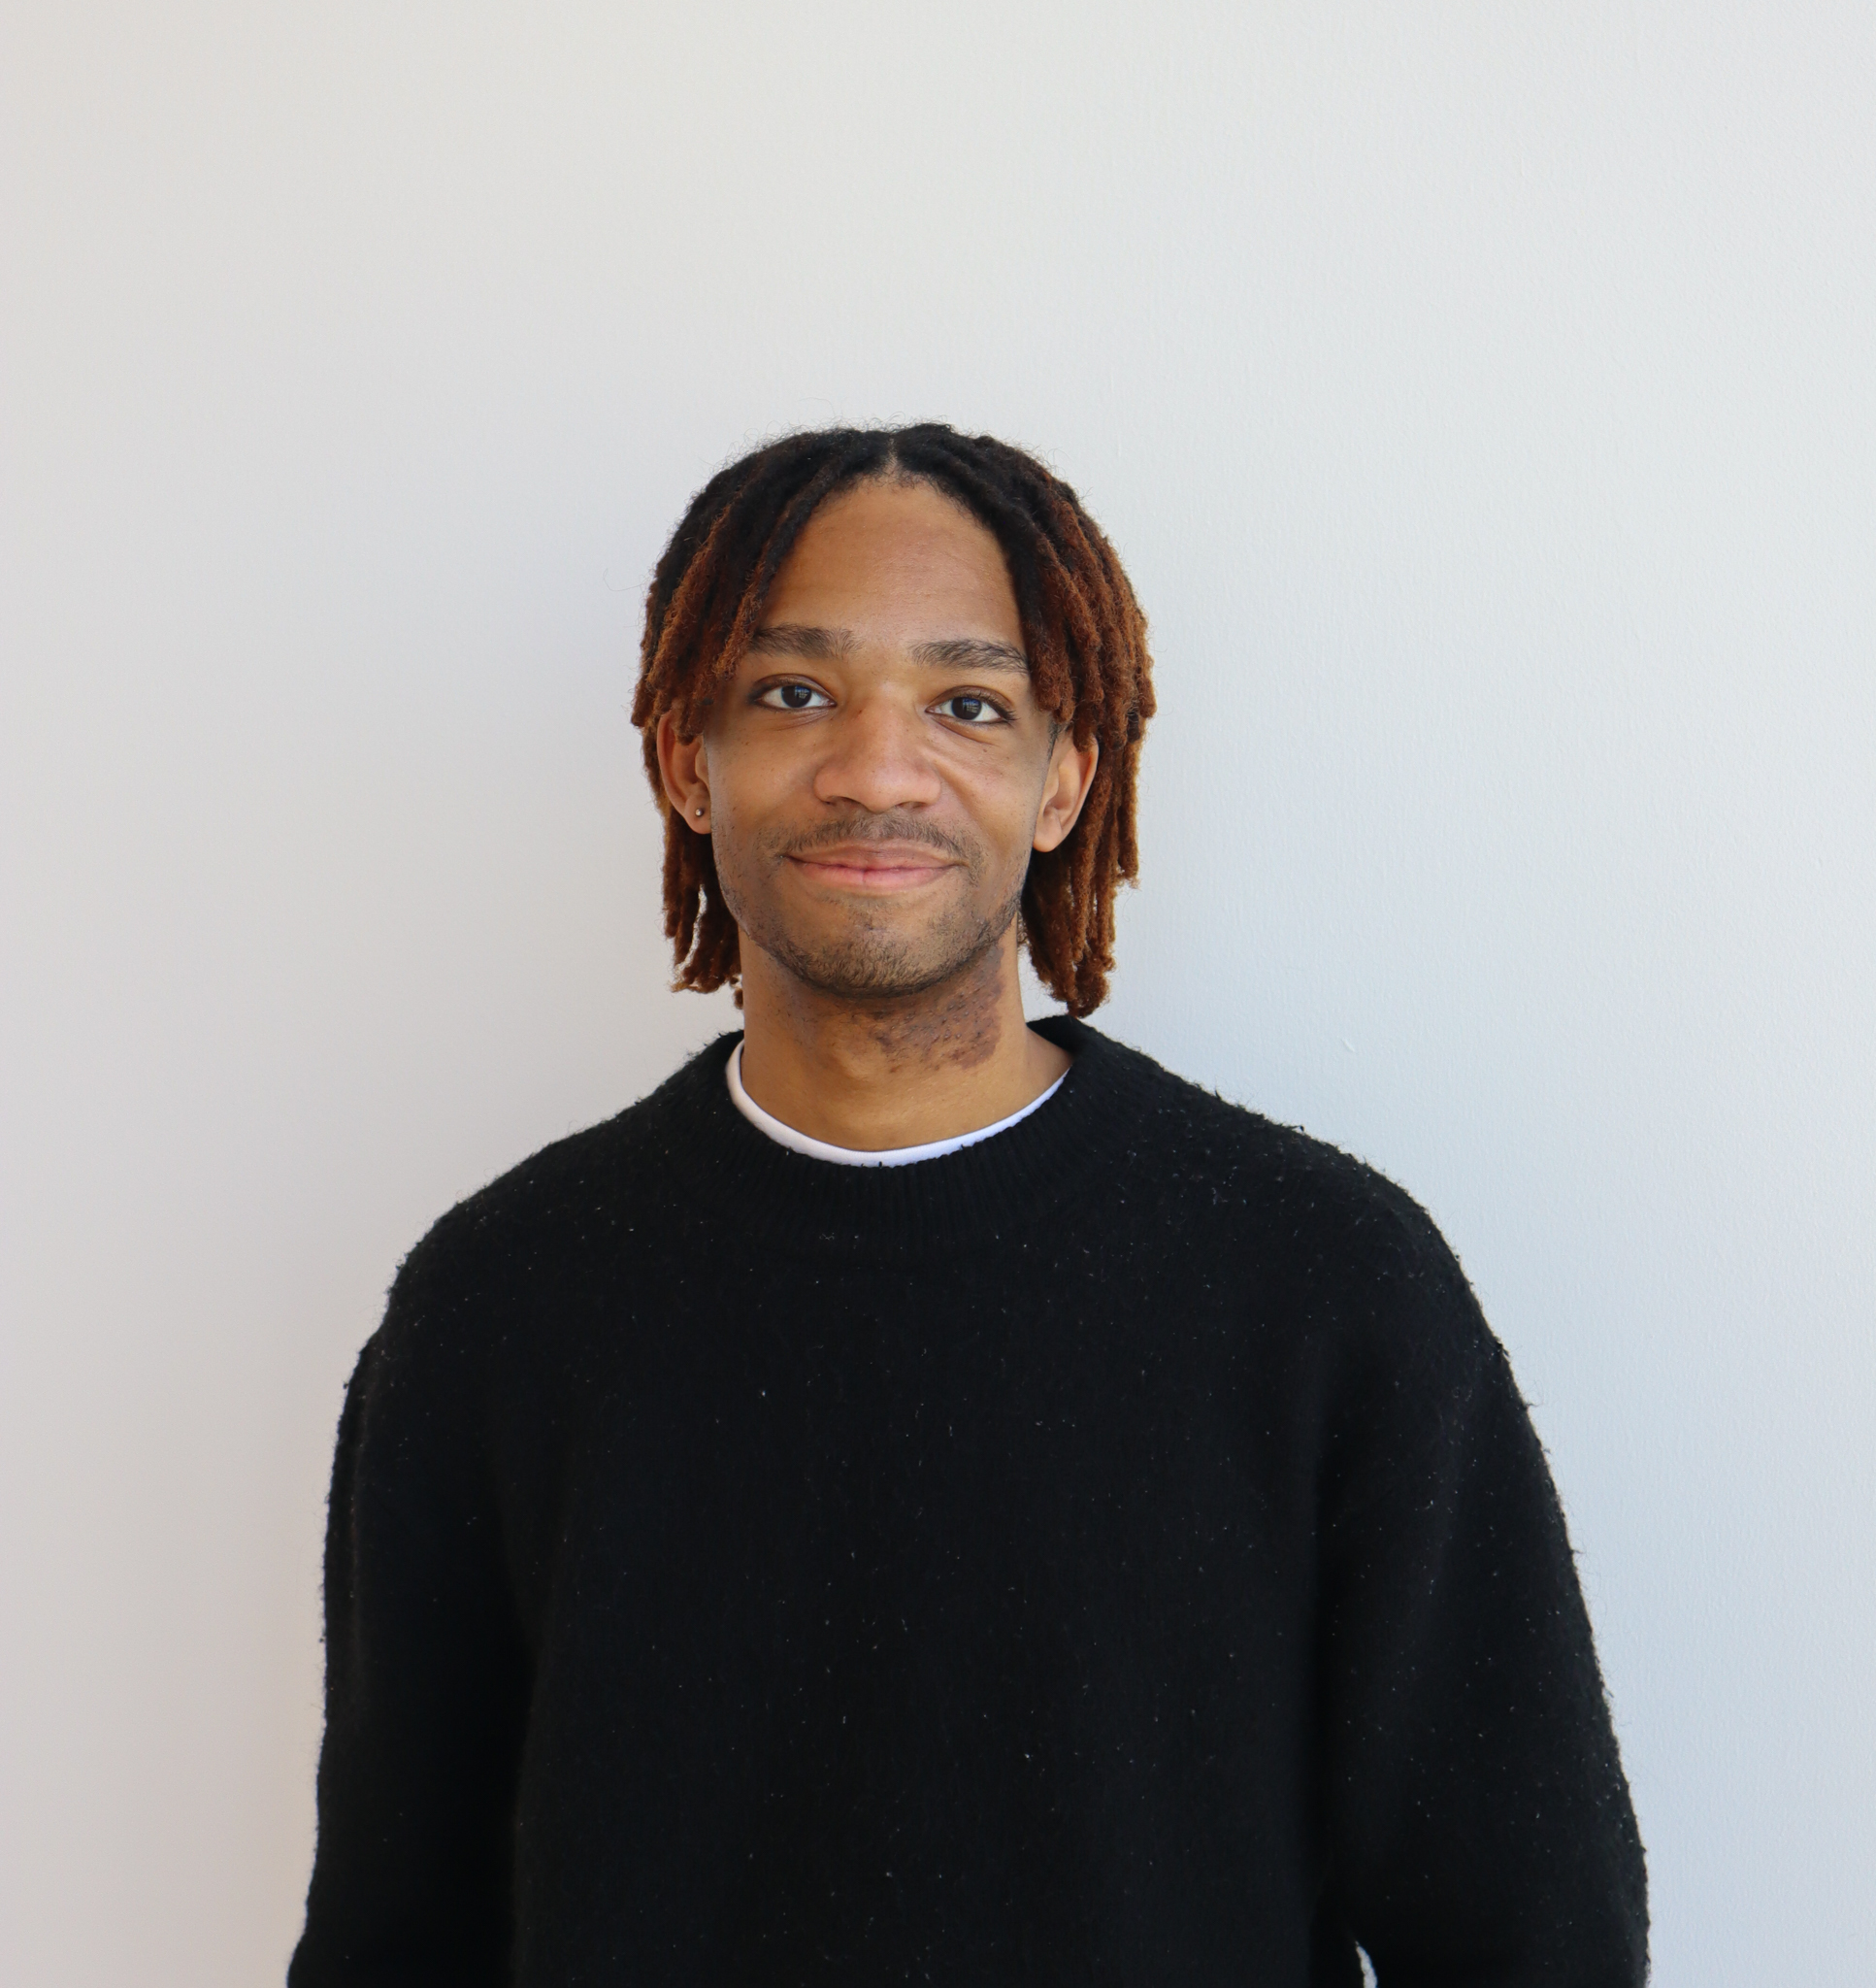 A Black man with short, layered red-brown locs wears a back sweater. He is standing in front of a white wall, smiling softly at camera.